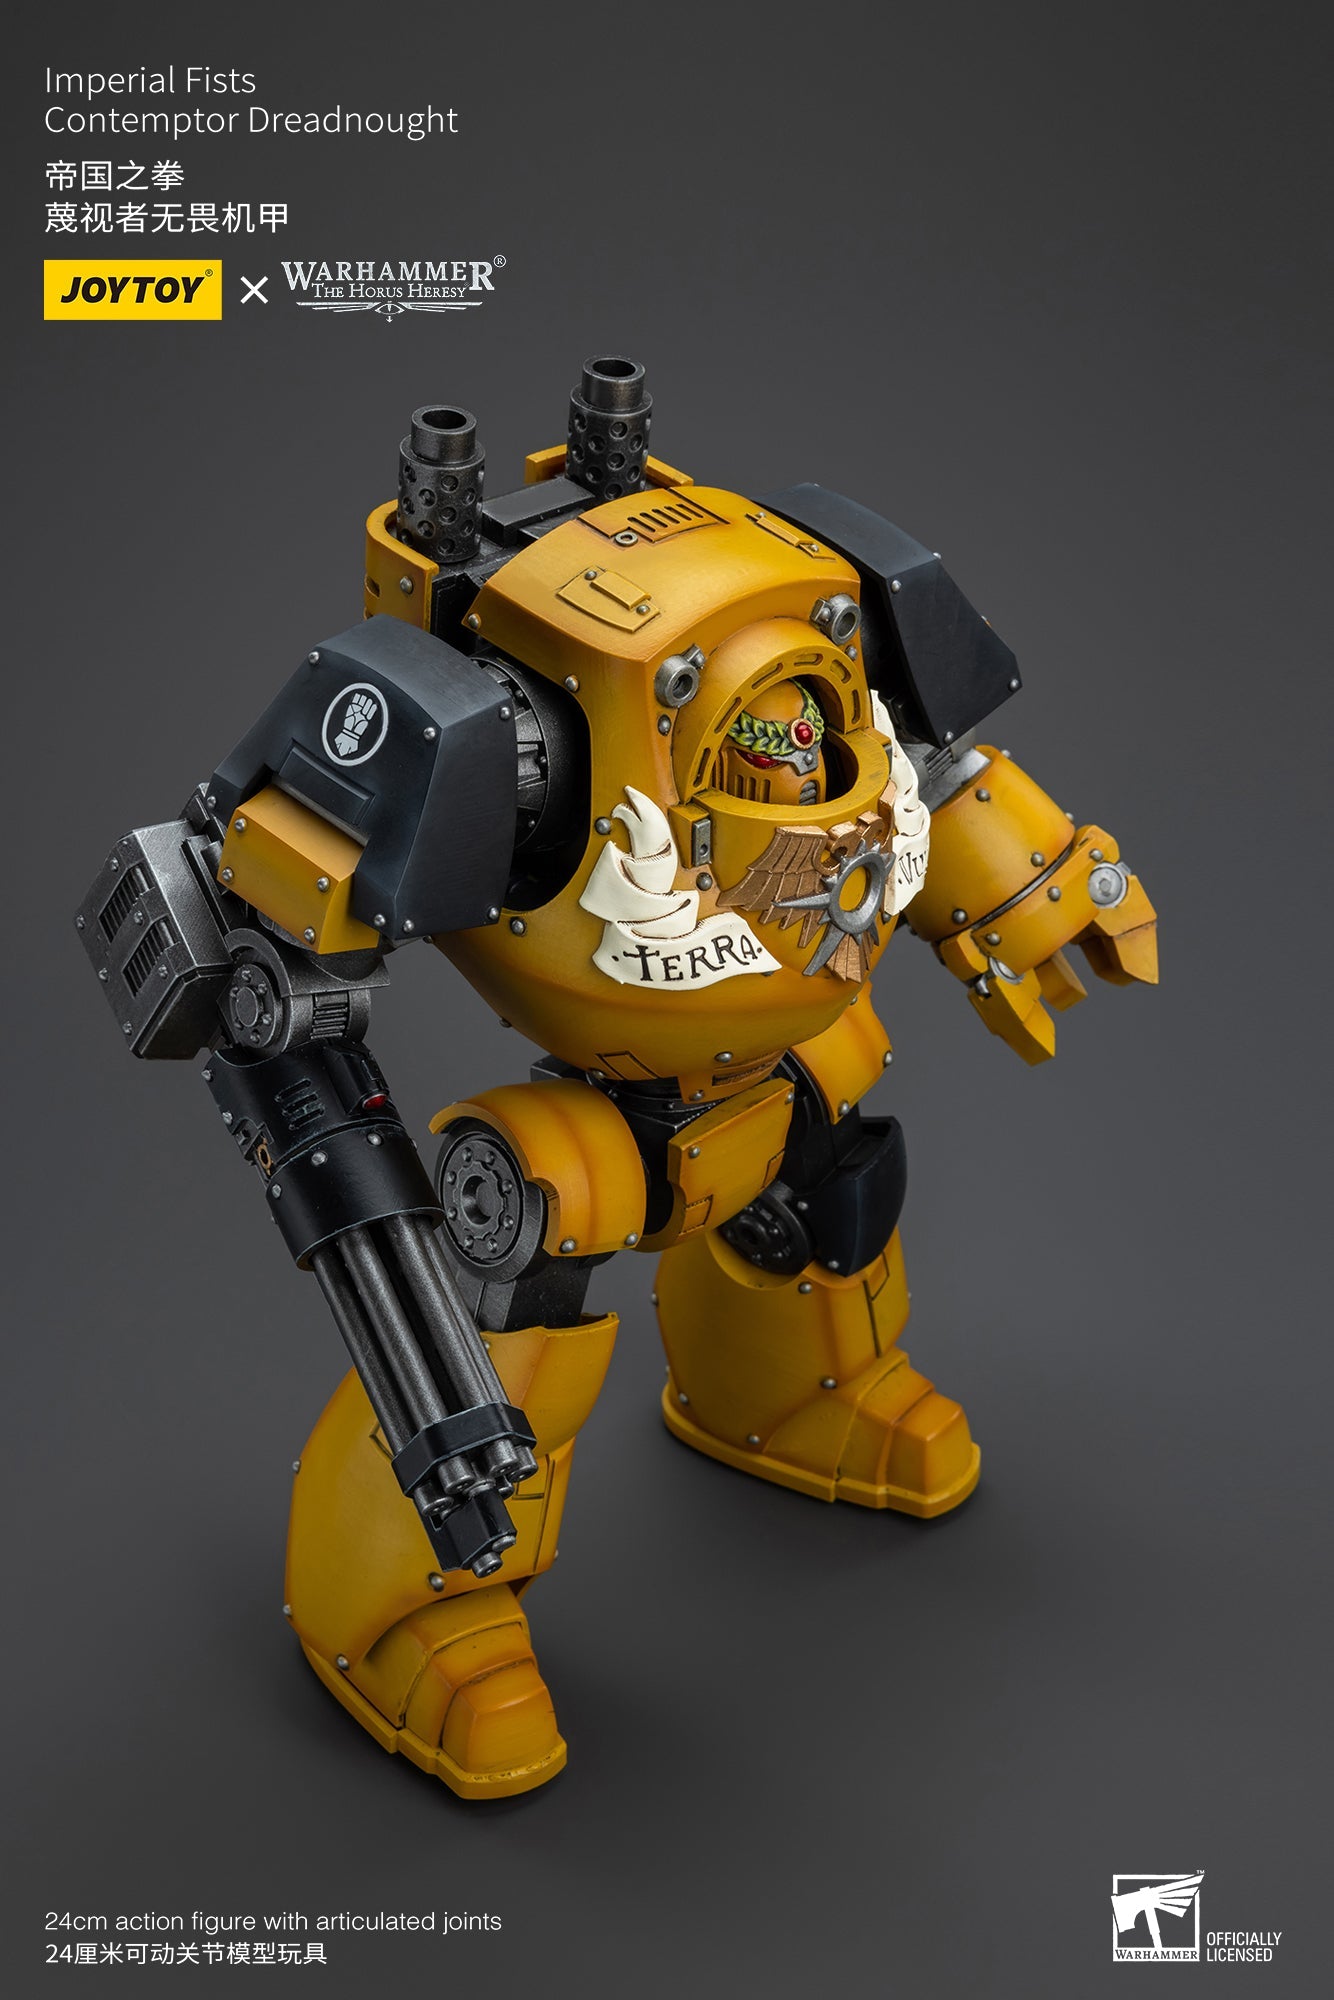 Imperial Fists Contemptor Dreadnought- Warhammer "The Horus Heresy" Action Figure By JOYTOY